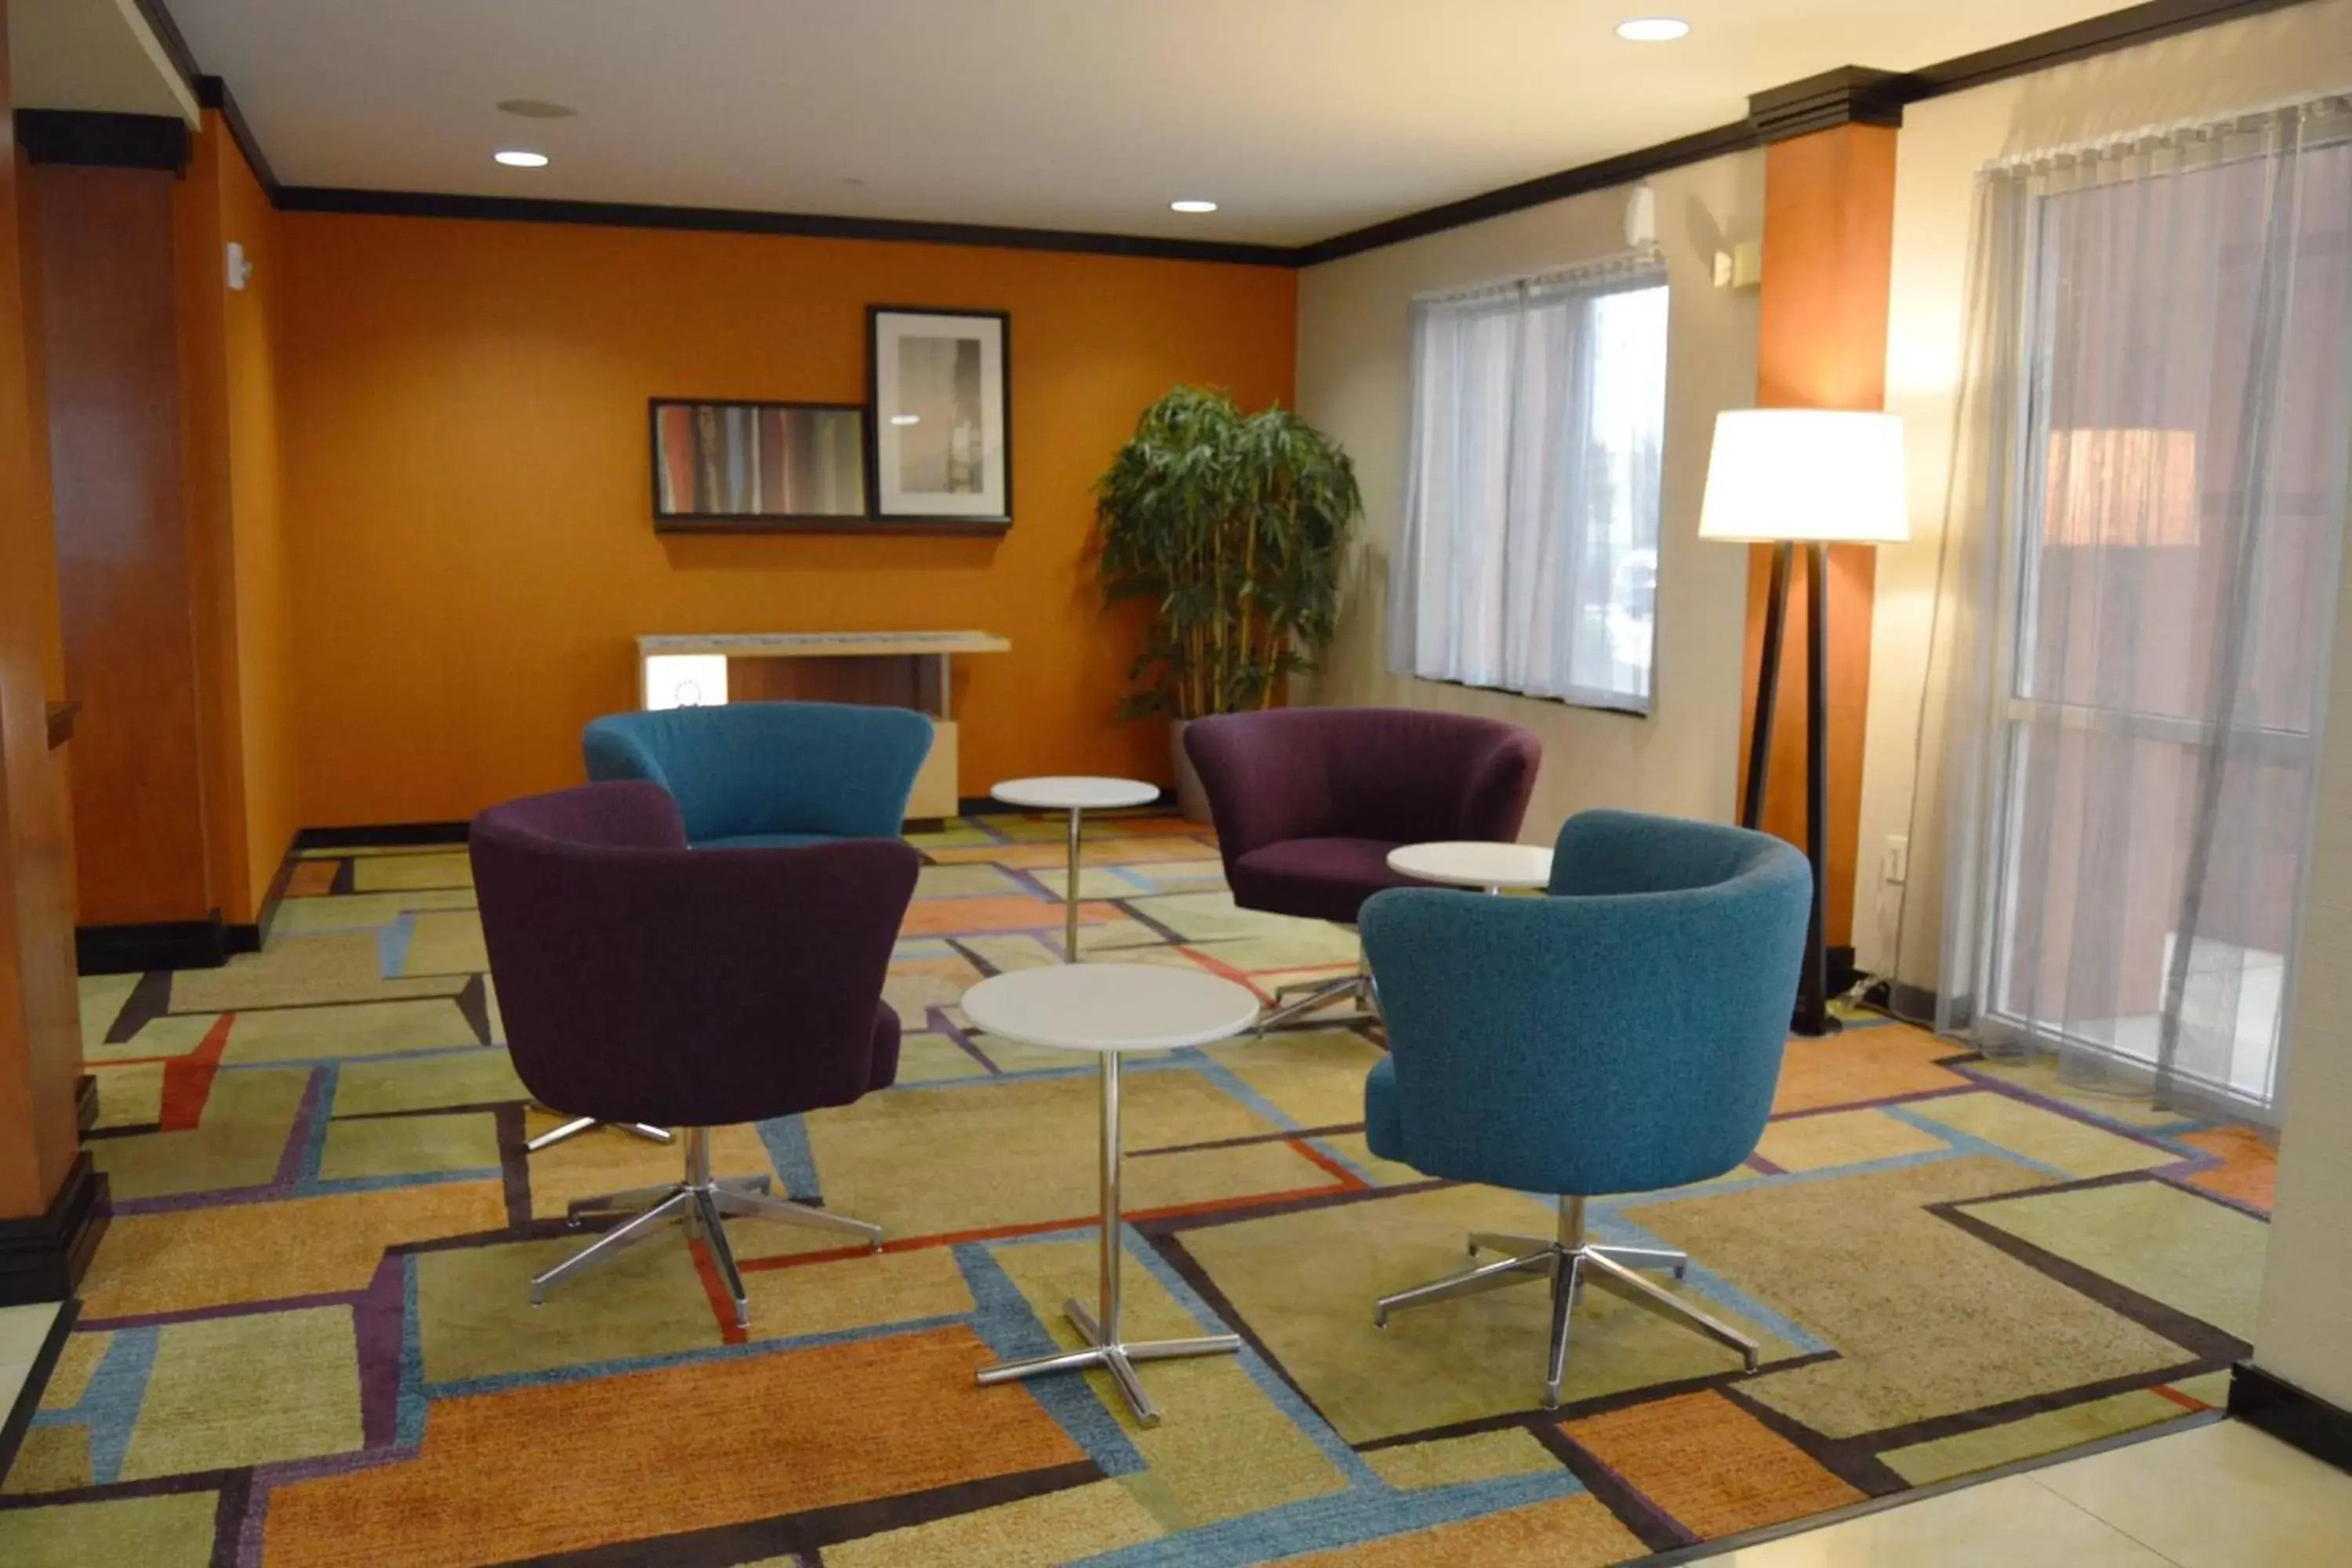 Lobby or reception in Fairfield Inn & Suites Houston Channelview